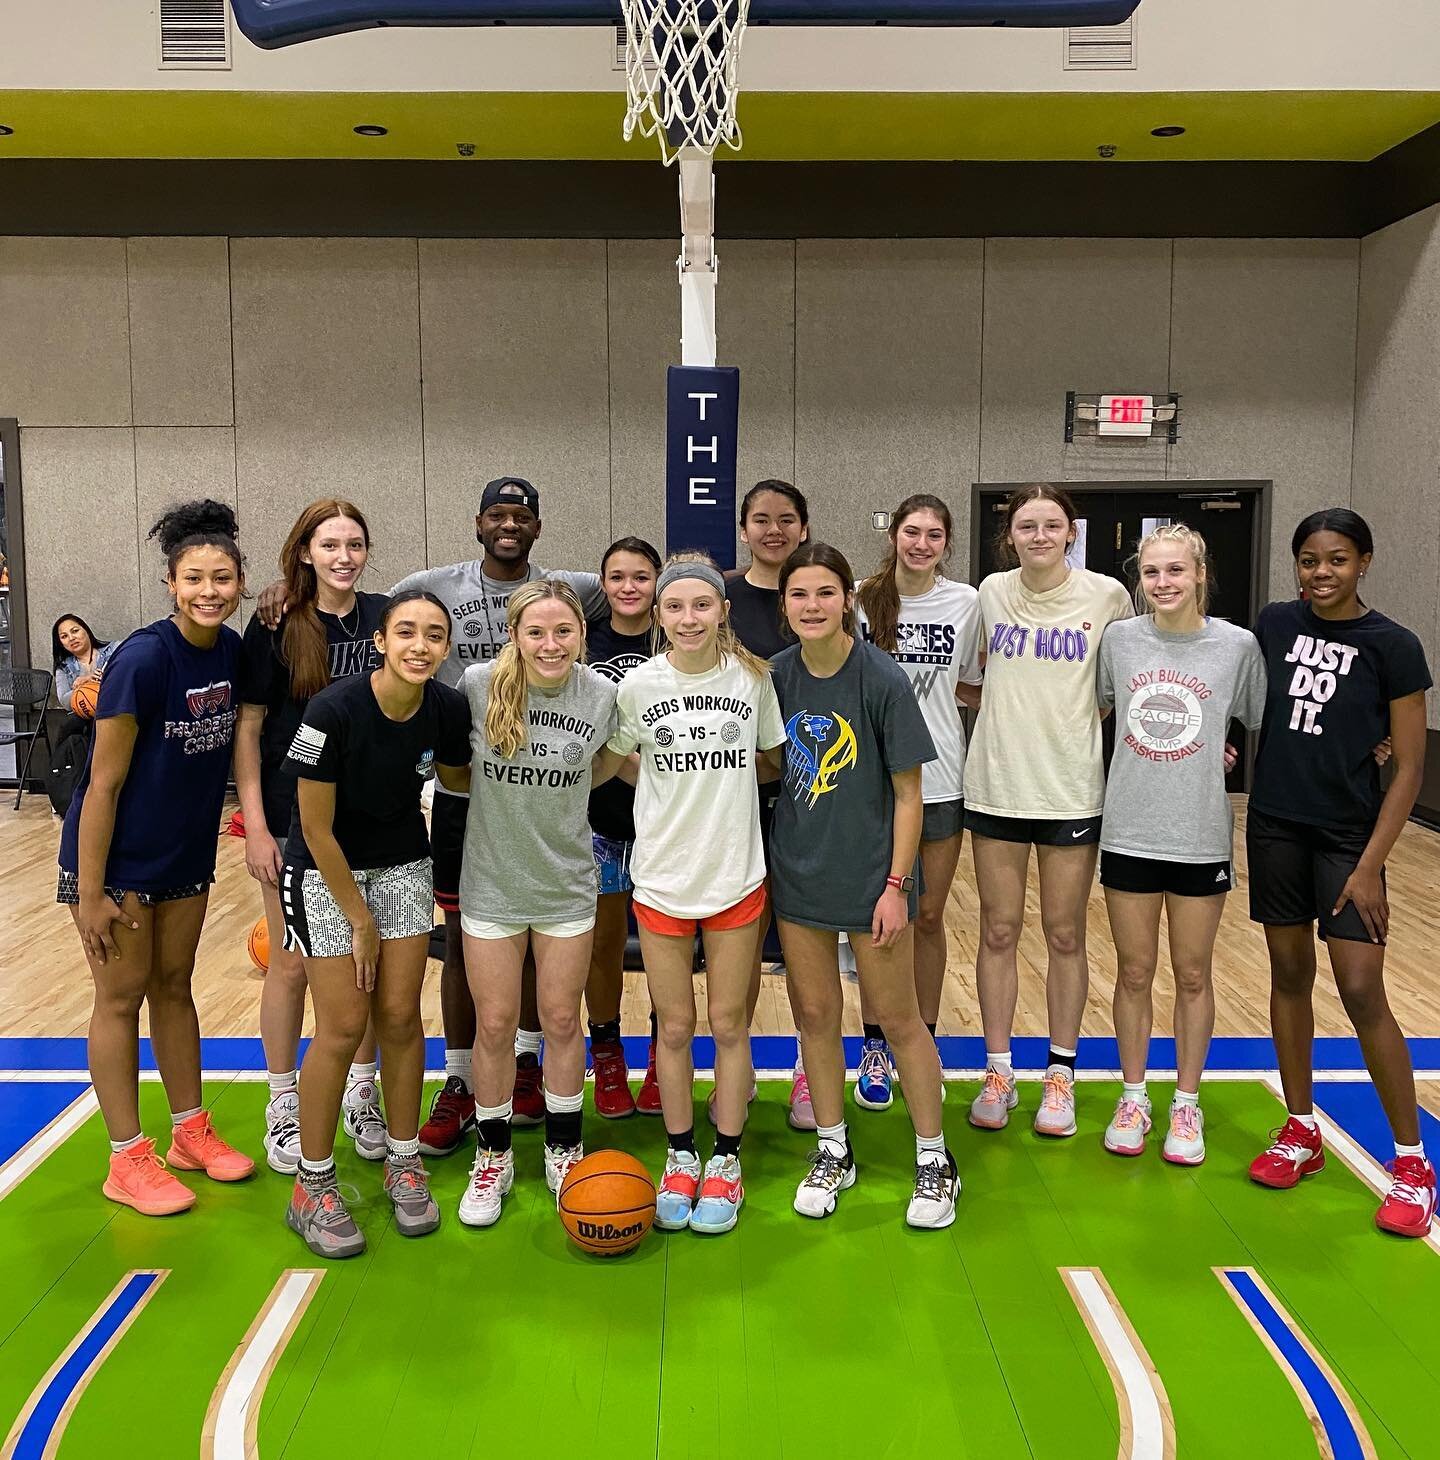 Great work ladies! Way to capitalize on the last day of 2022 - working in the gym to get closer to you basketball goals. 

Keep up the good work, good luck the rest of the season! 

@seedsworkouts | @sheputsinwork | #2022tuneup